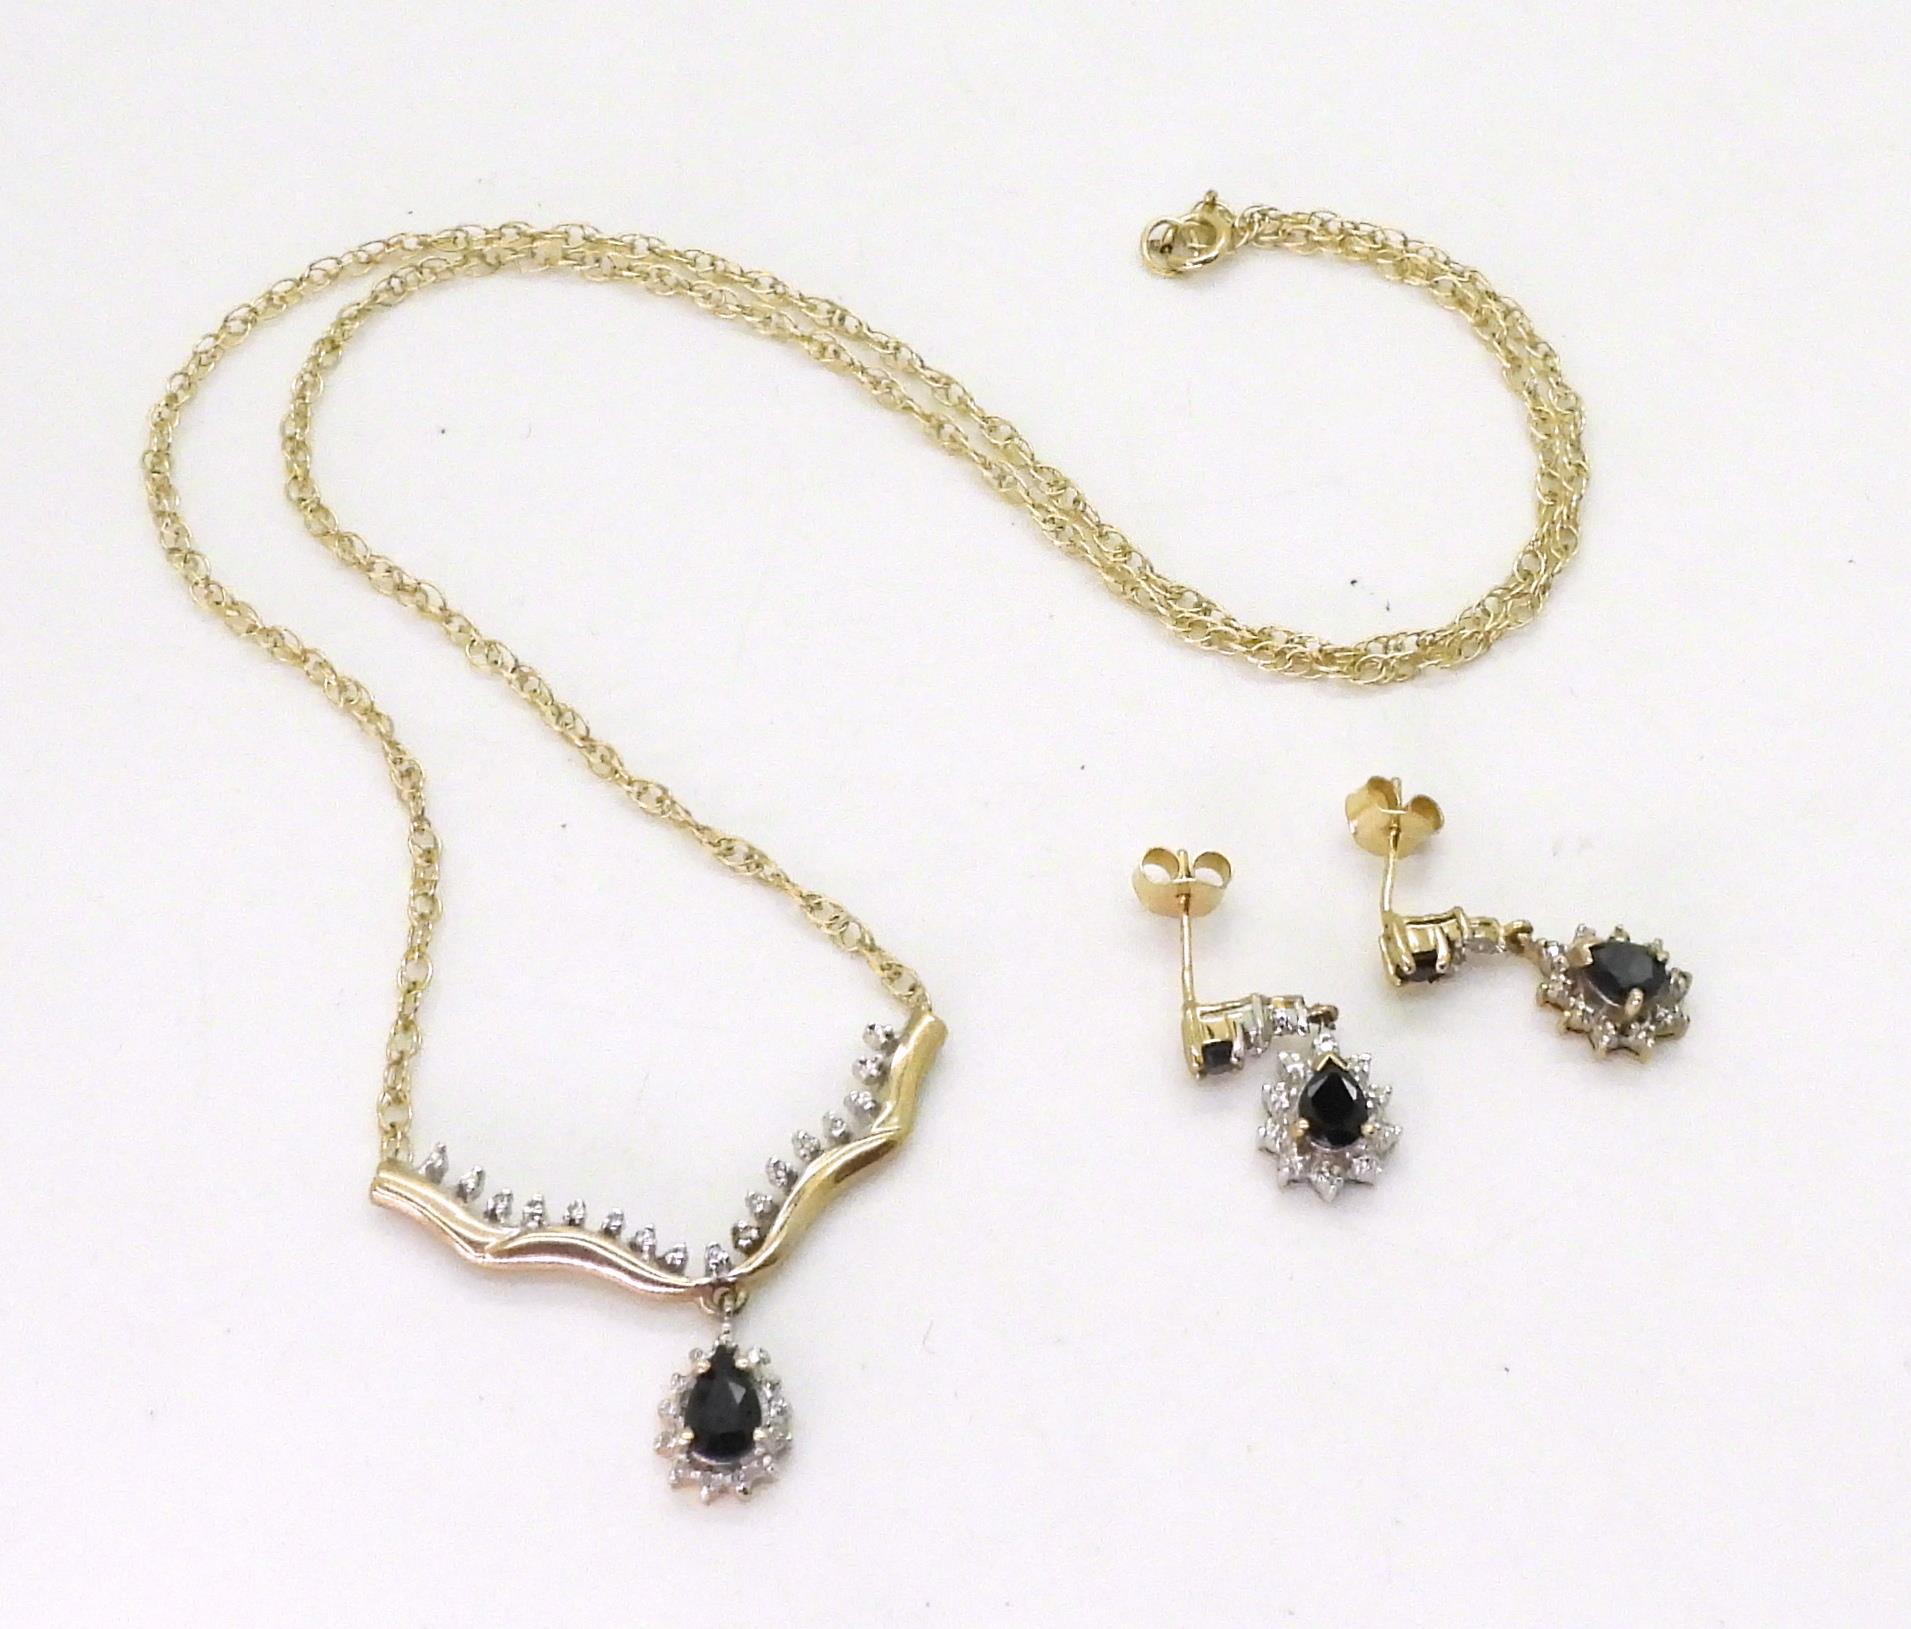 A 9ct gold sapphire and diamond accent pendant necklace, with matching earrings weight together 6gms - Image 2 of 2